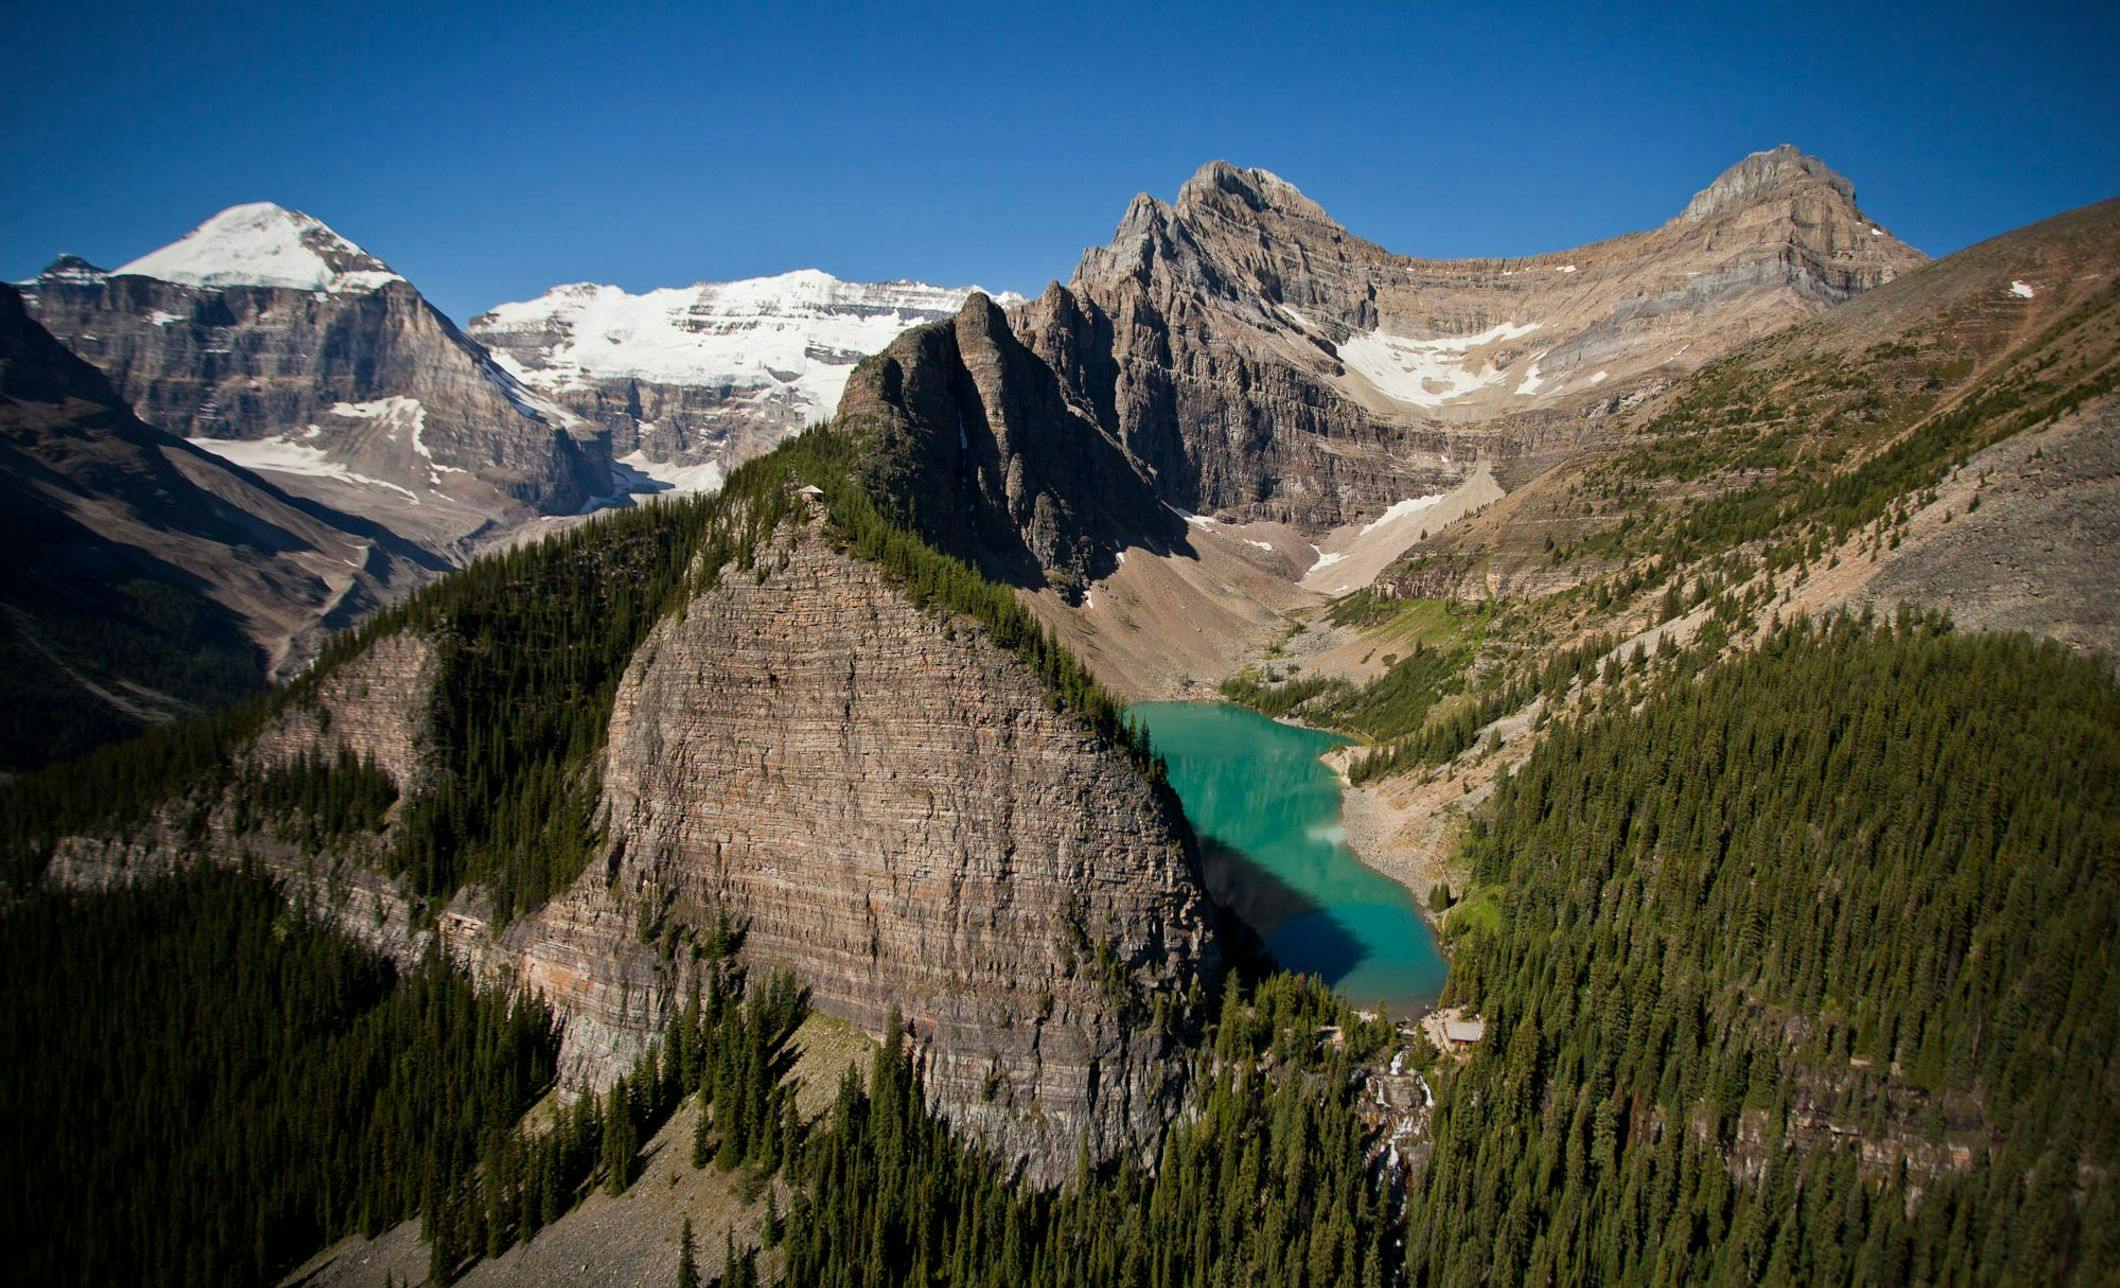 Lake Agnes Teahouse from above, Banff National Park, AB